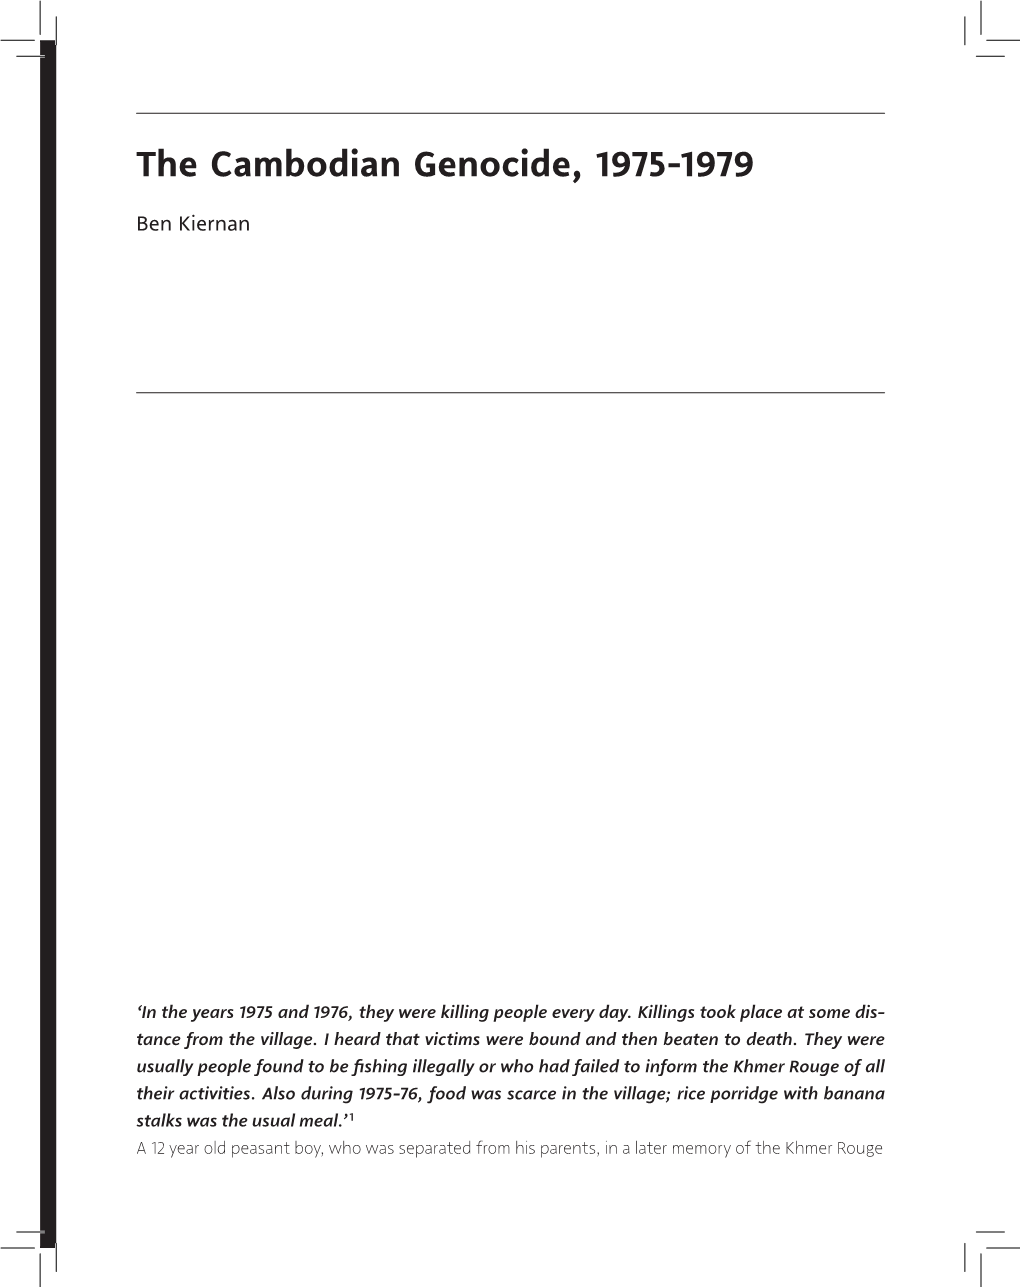 The Cambodian Genocide, 1975-1979